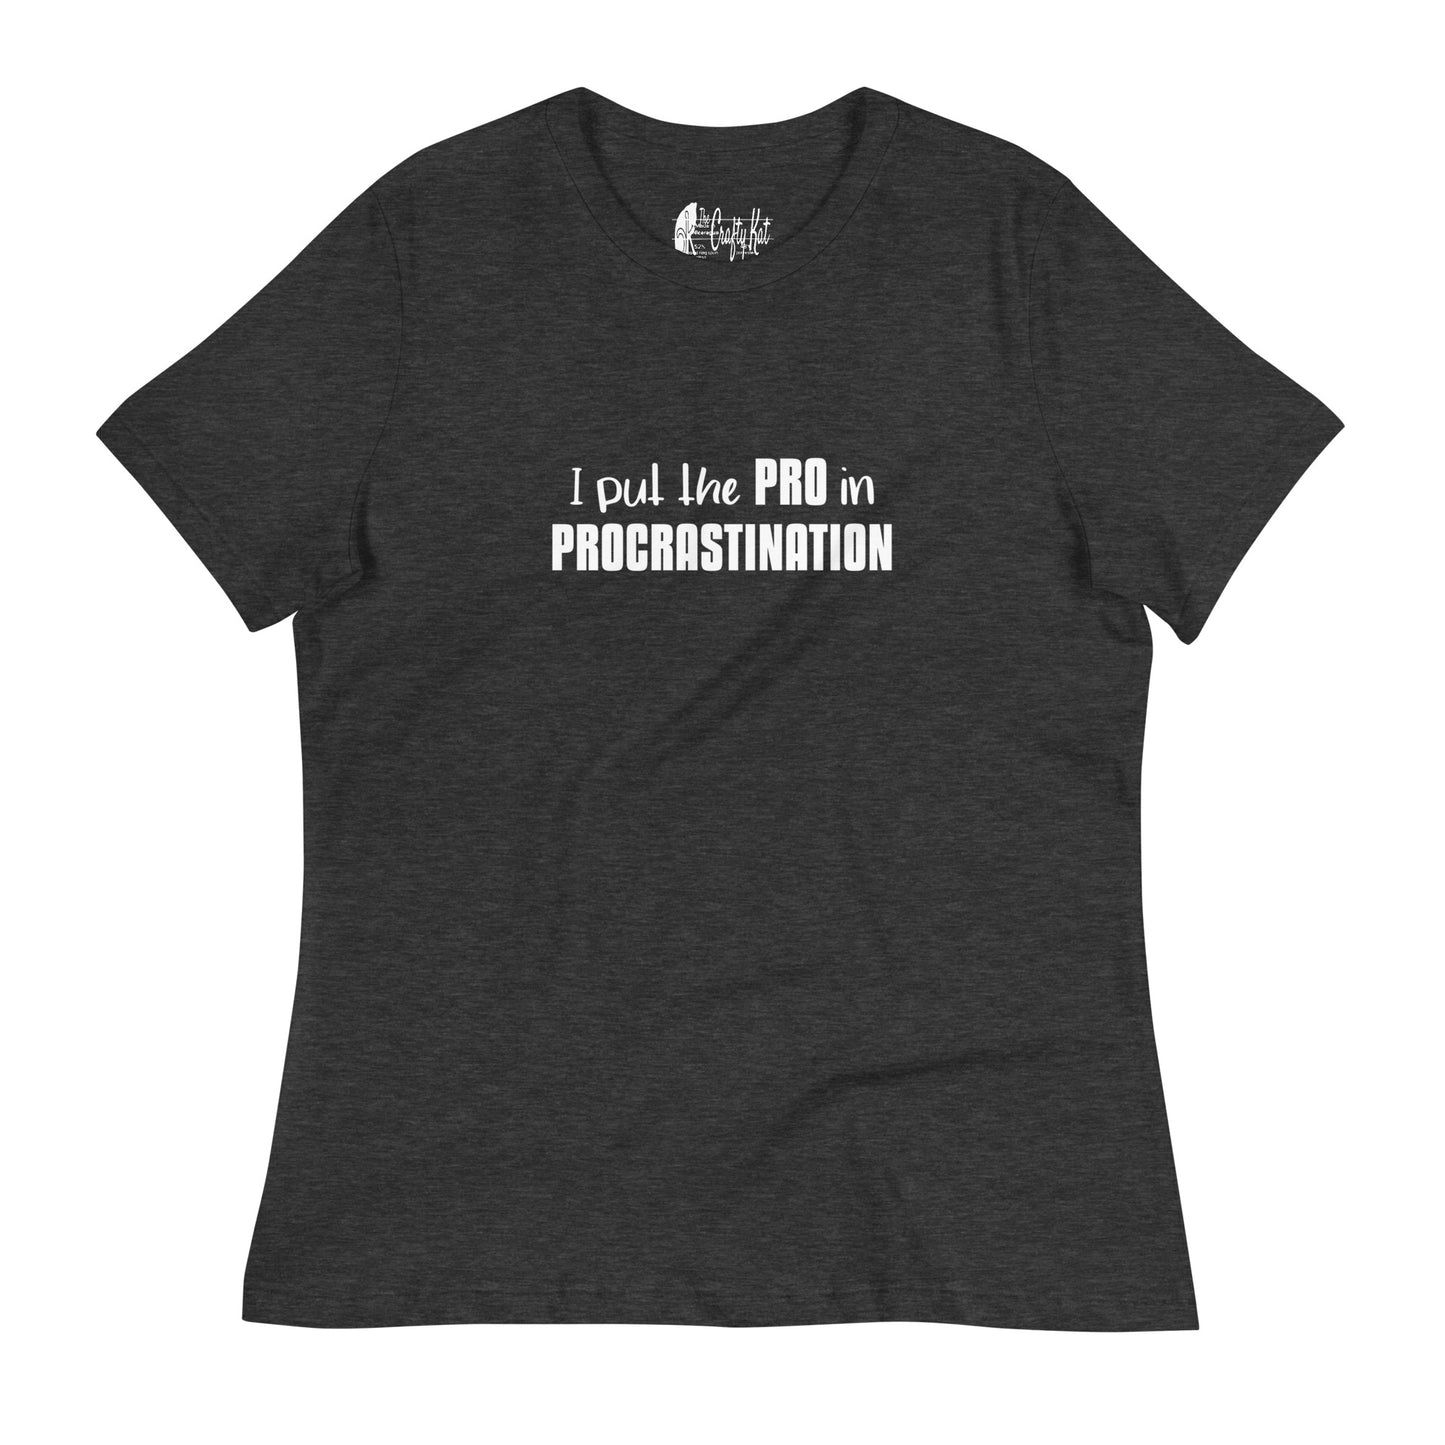 Dark Grey Heather women's relaxed t-shirt with text graphic: "I put the PRO in PROCRASTINATION"